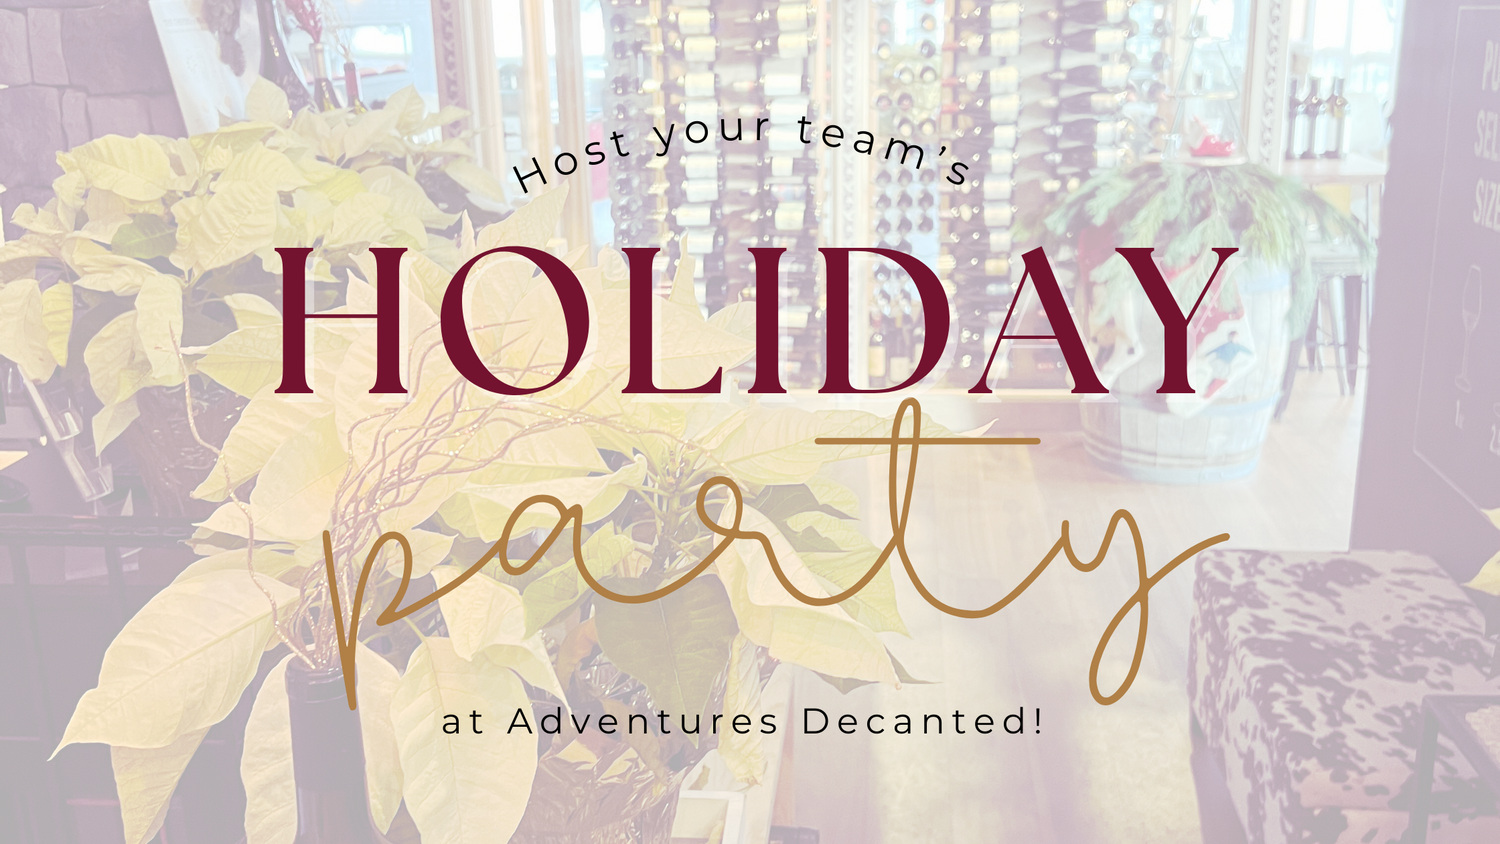 Host Your Team's Holiday Party at Adventures Decanted!